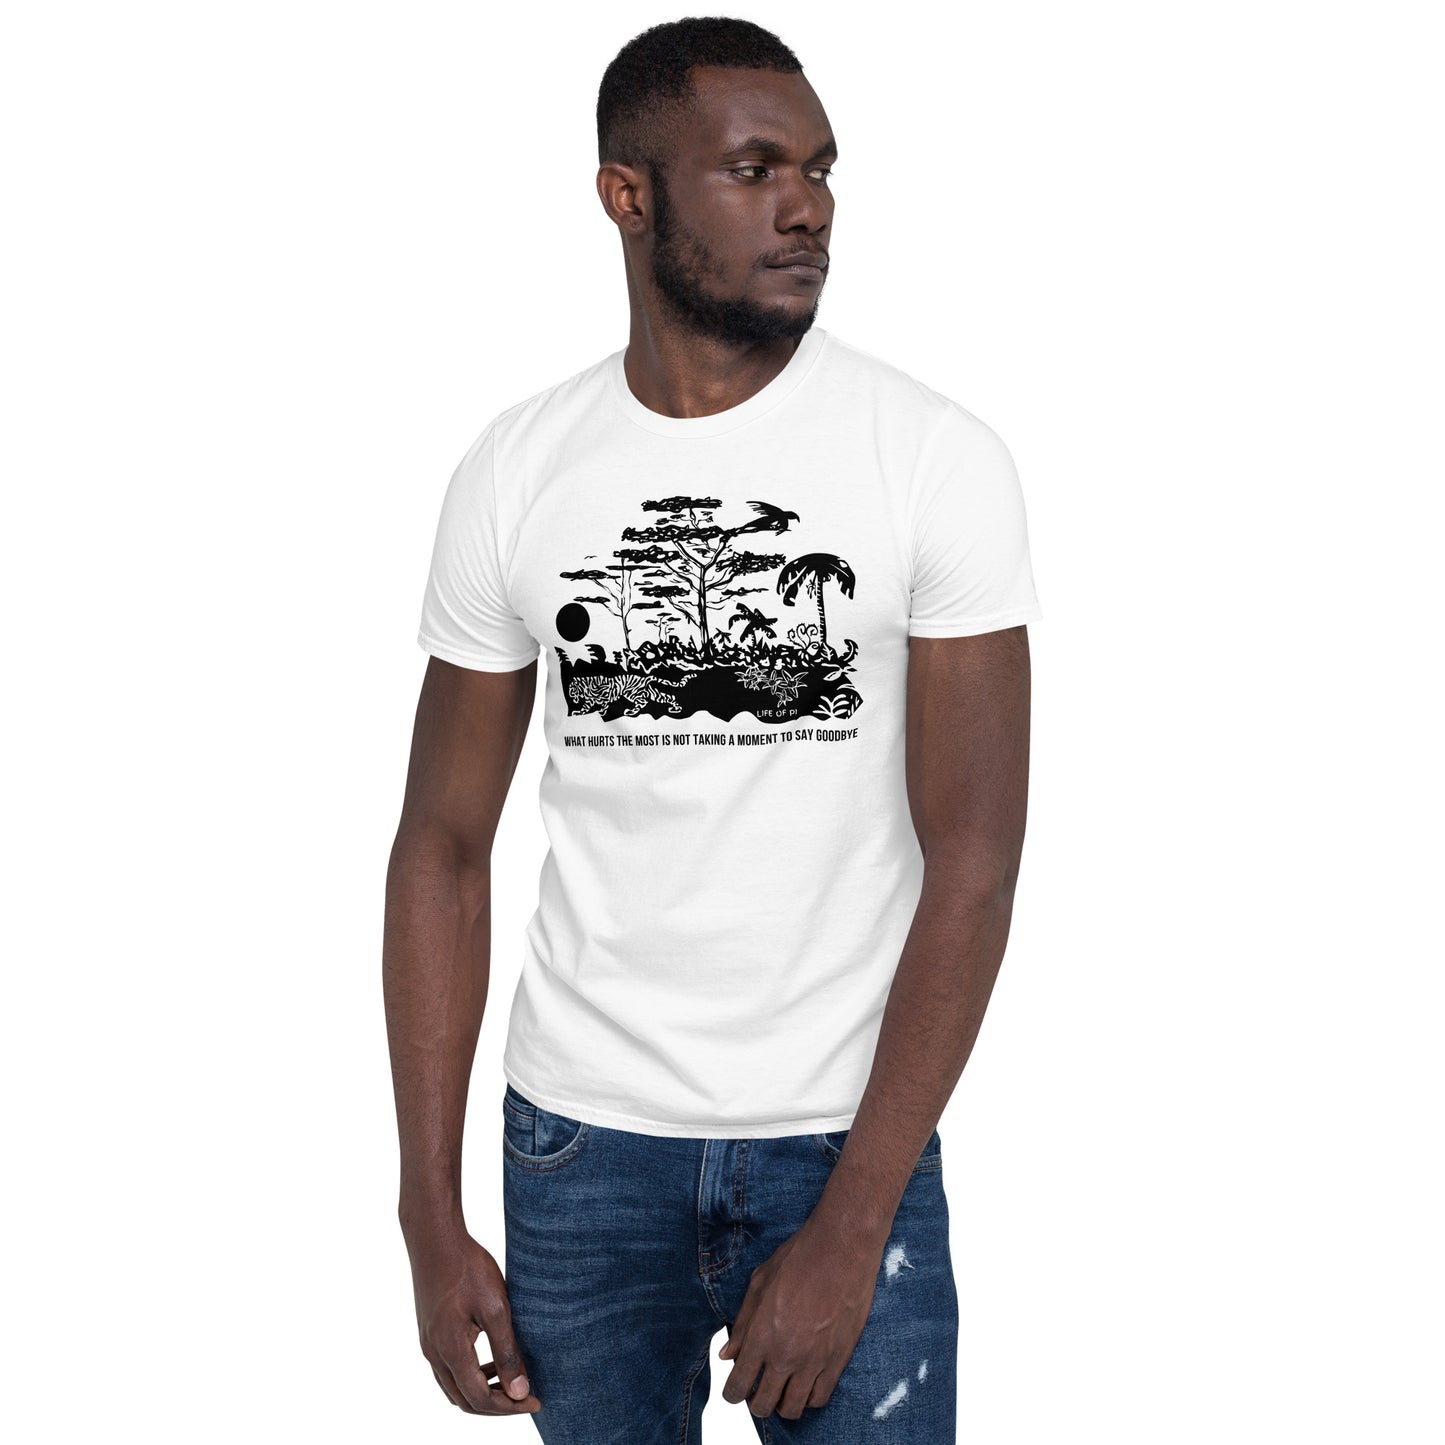 What Hurts the Most is not Taking a Moment to say Goodbye Short-Sleeve Unisex T-Shirt